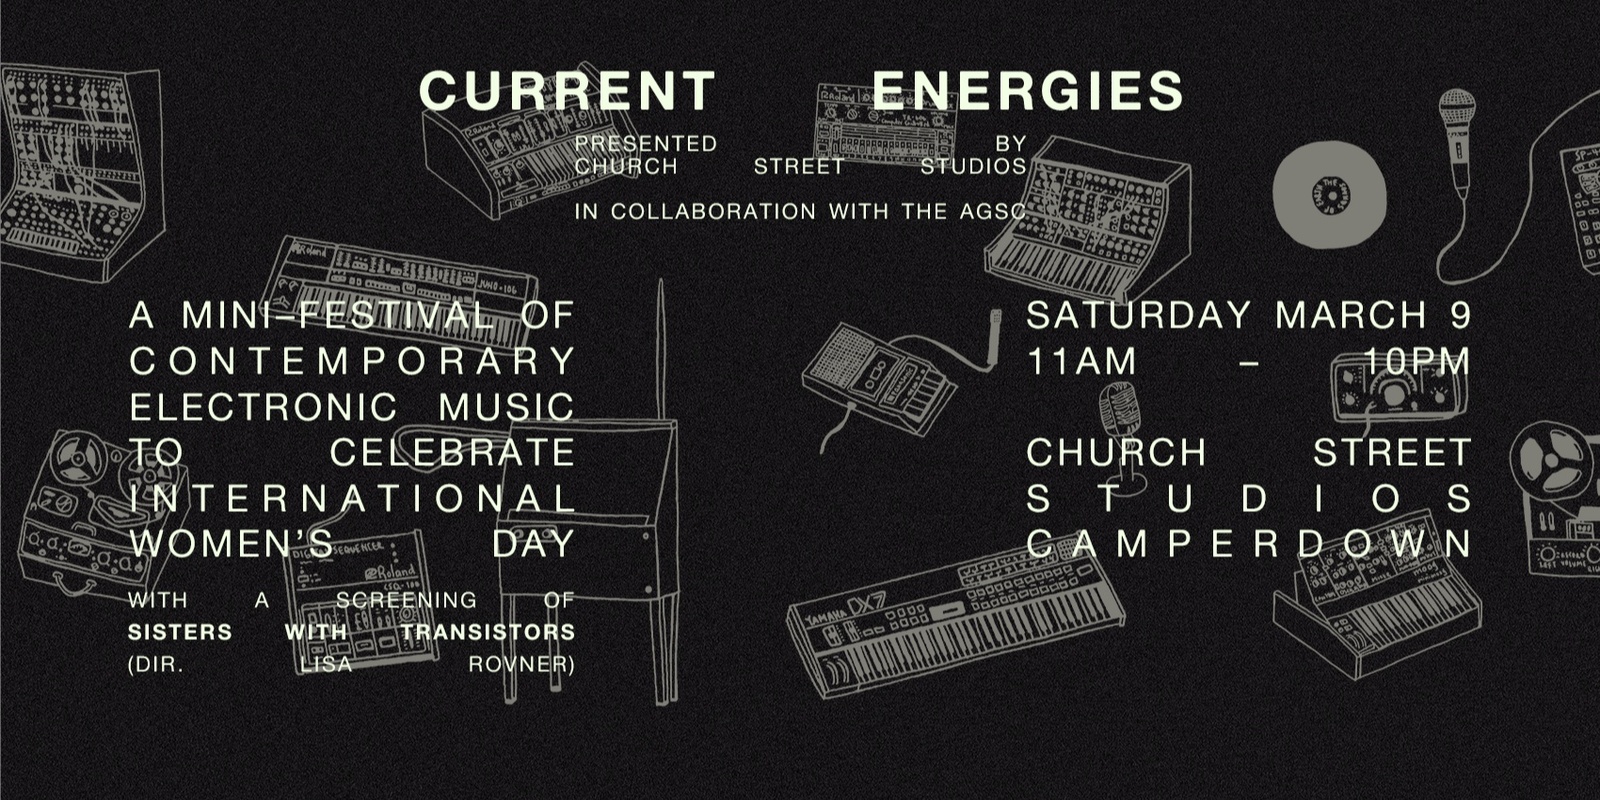 Banner image for CURRENT ENERGIES - A Festival of Contemporary Electronic Music & Documentary Screening